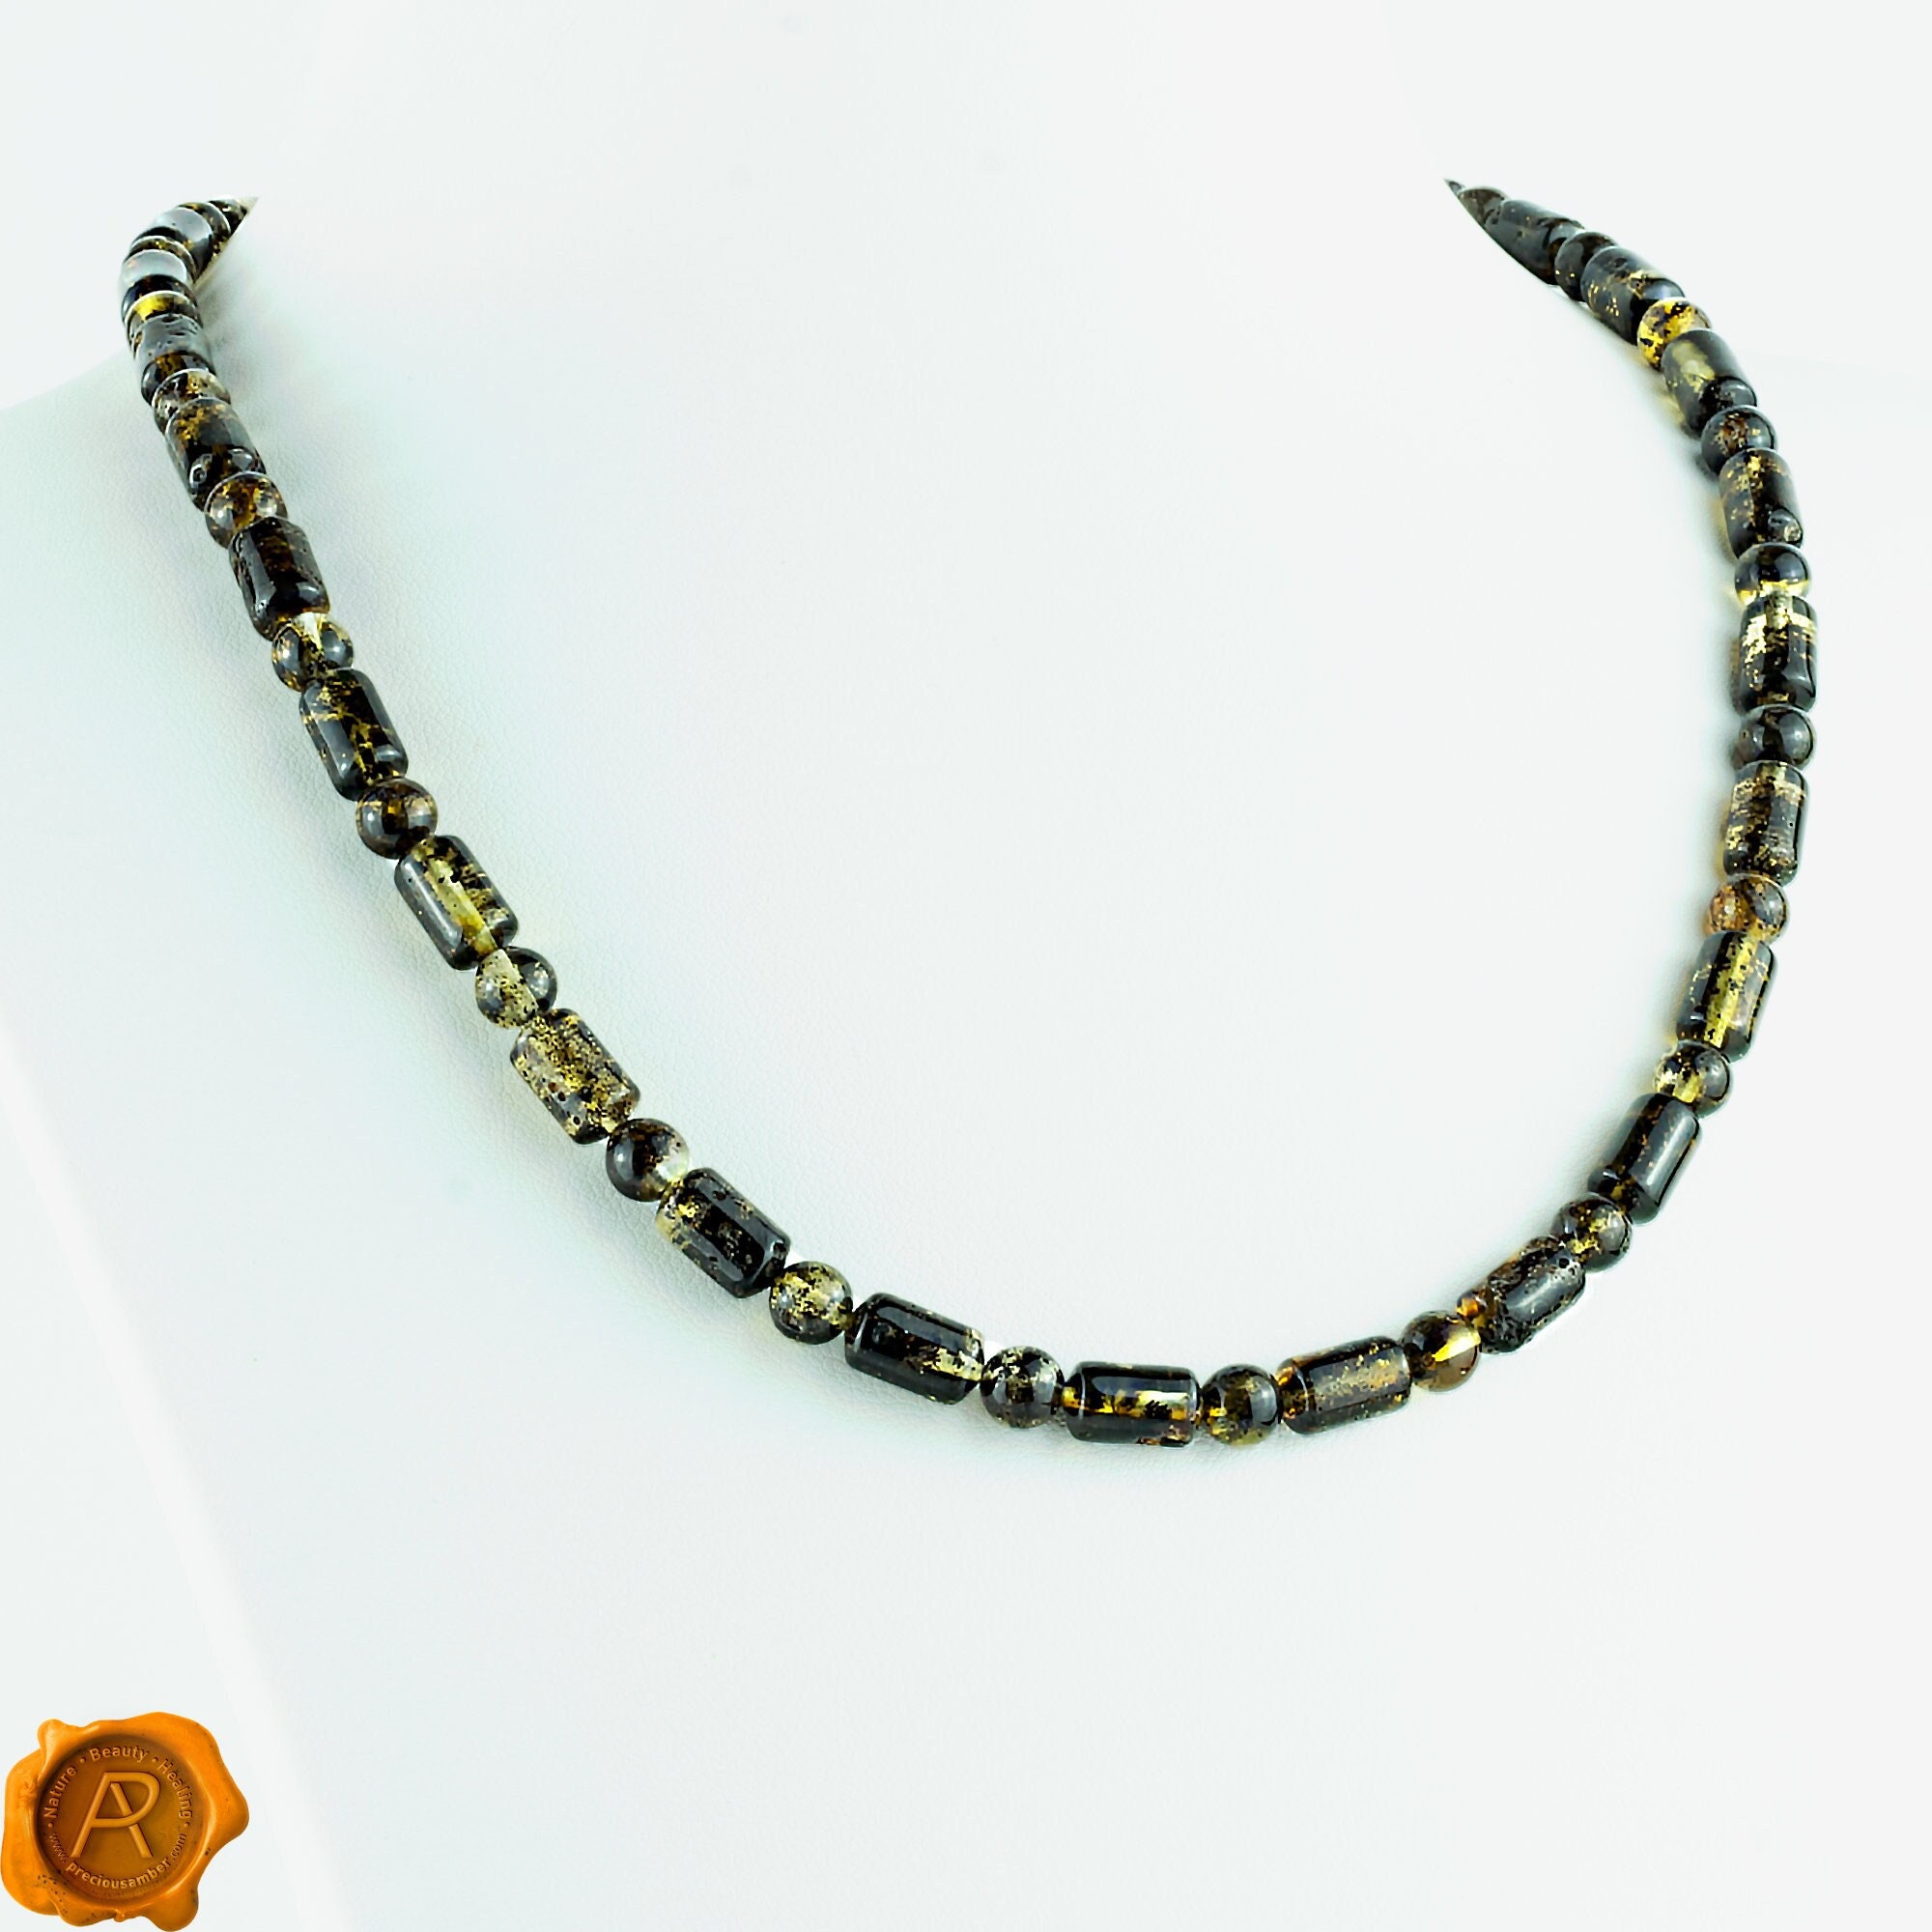 Large Bean-Shaped Green Amber with Fluorite Necklace – The Beaded Bub